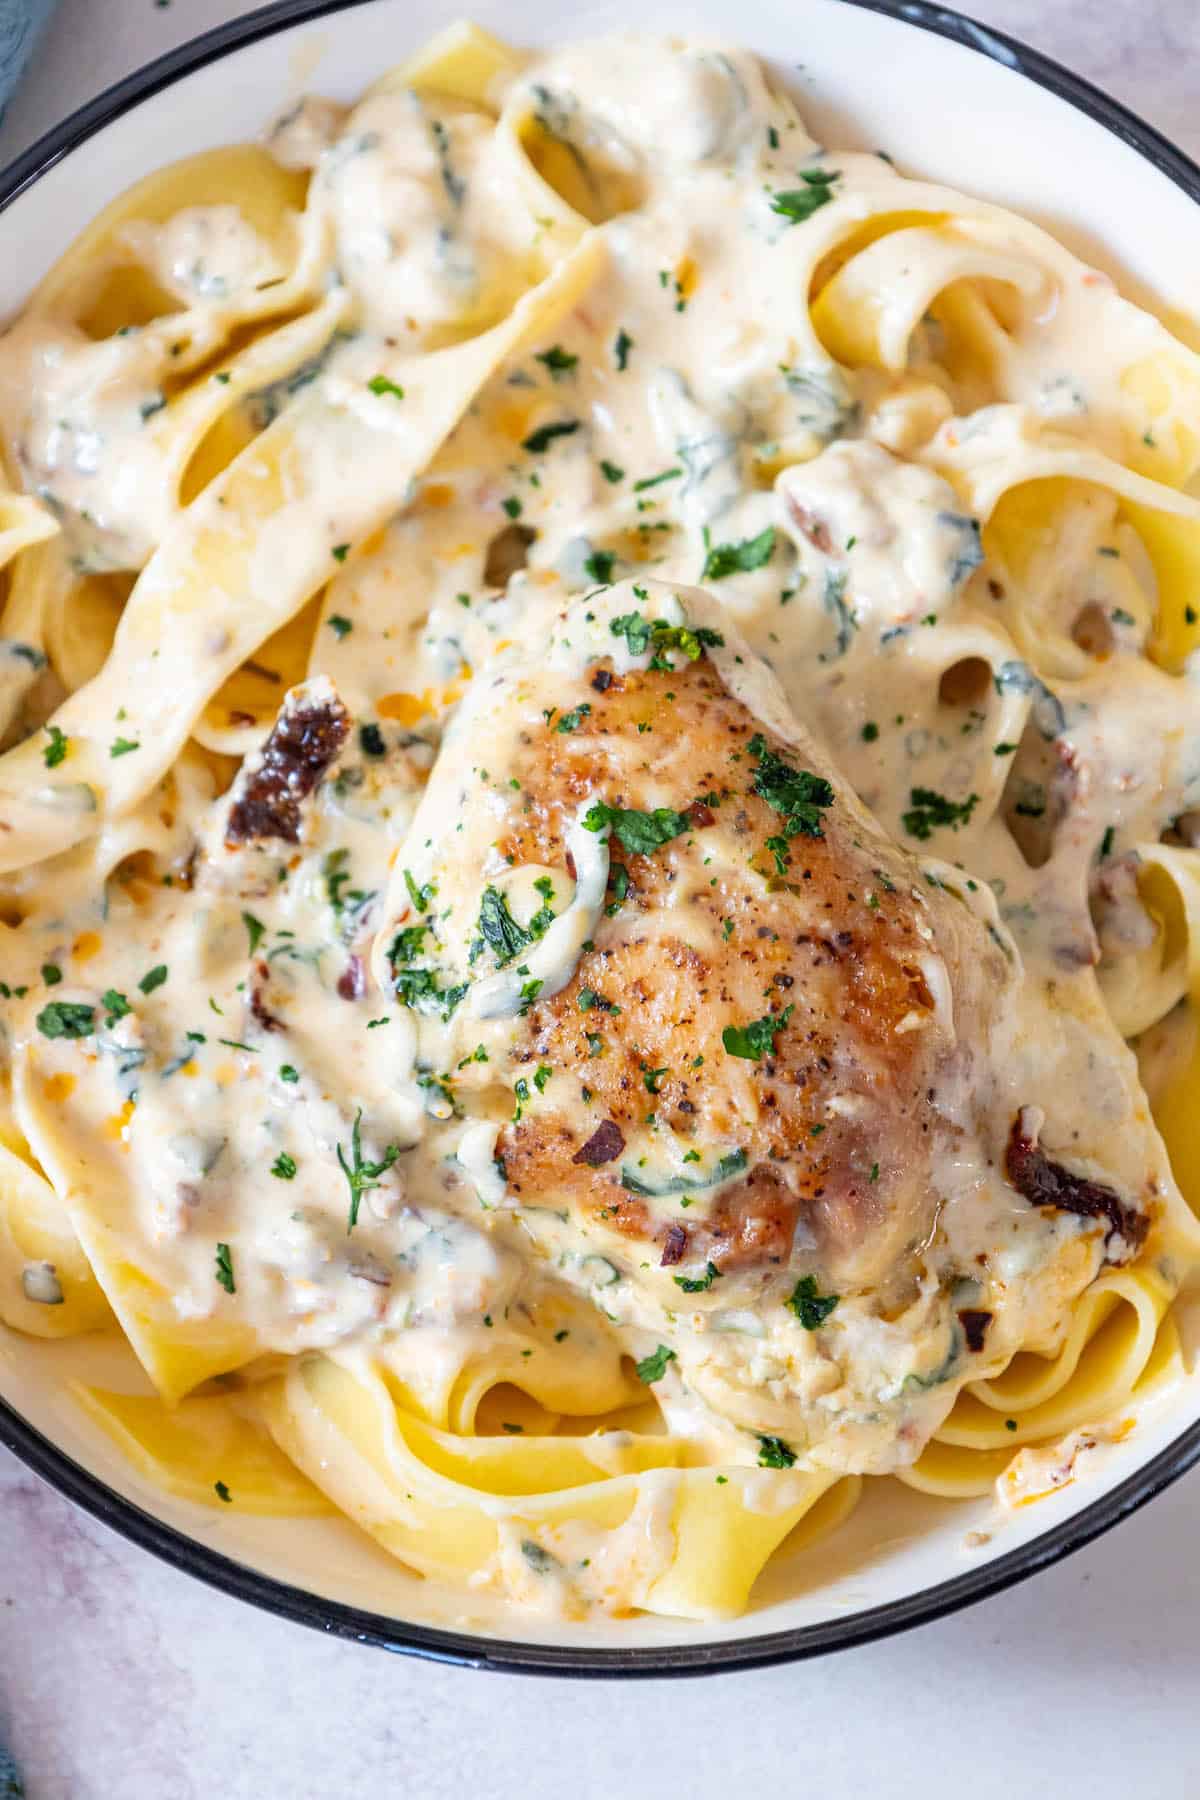 A creamy bowl of Tuscan pasta with chicken.